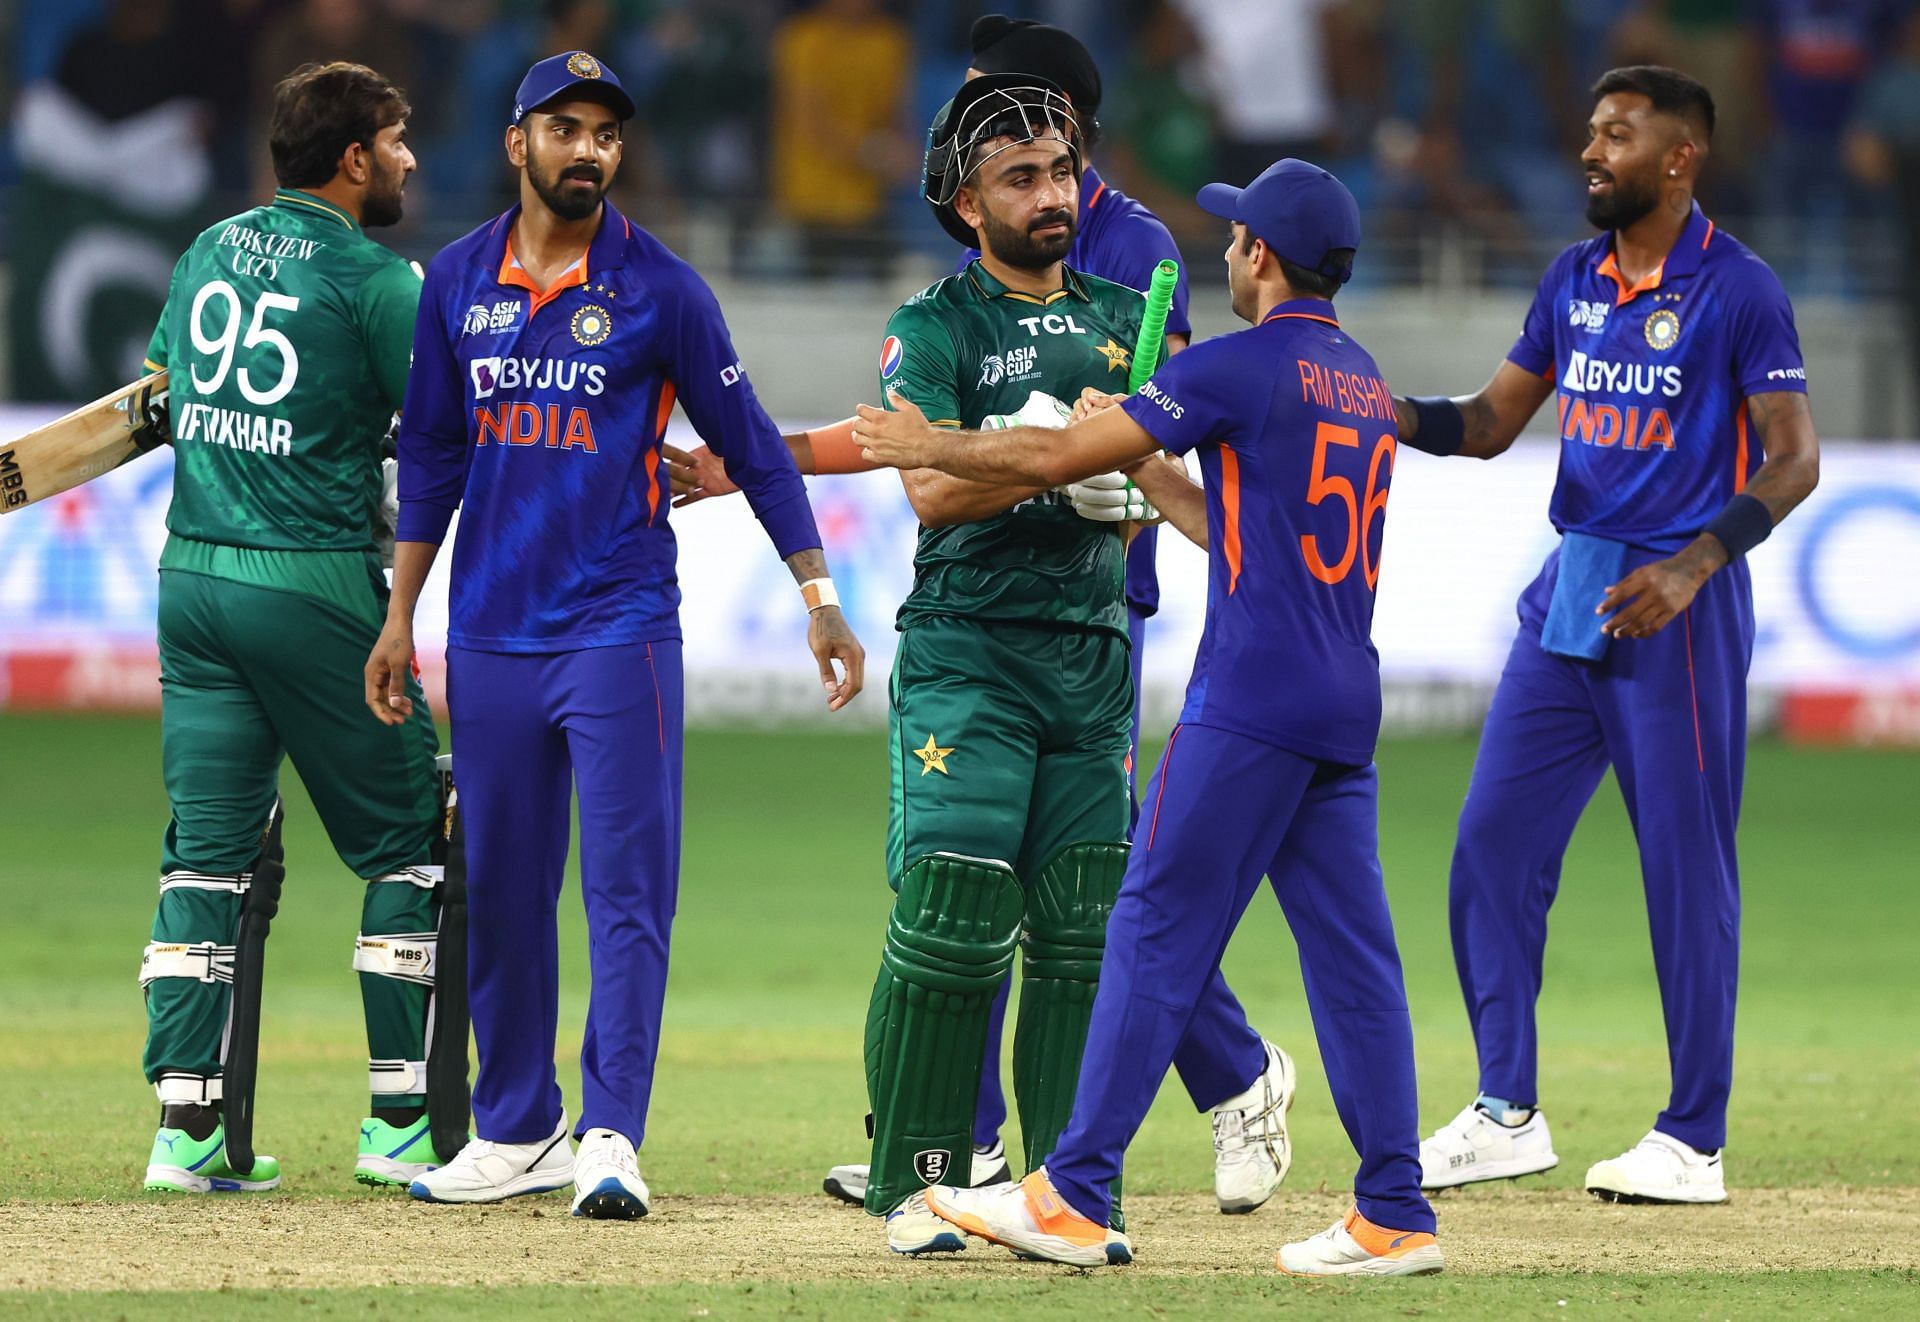 Pakistan beat India in their first match of the Asia Cup 2022 Super 4. (Image: Getty)